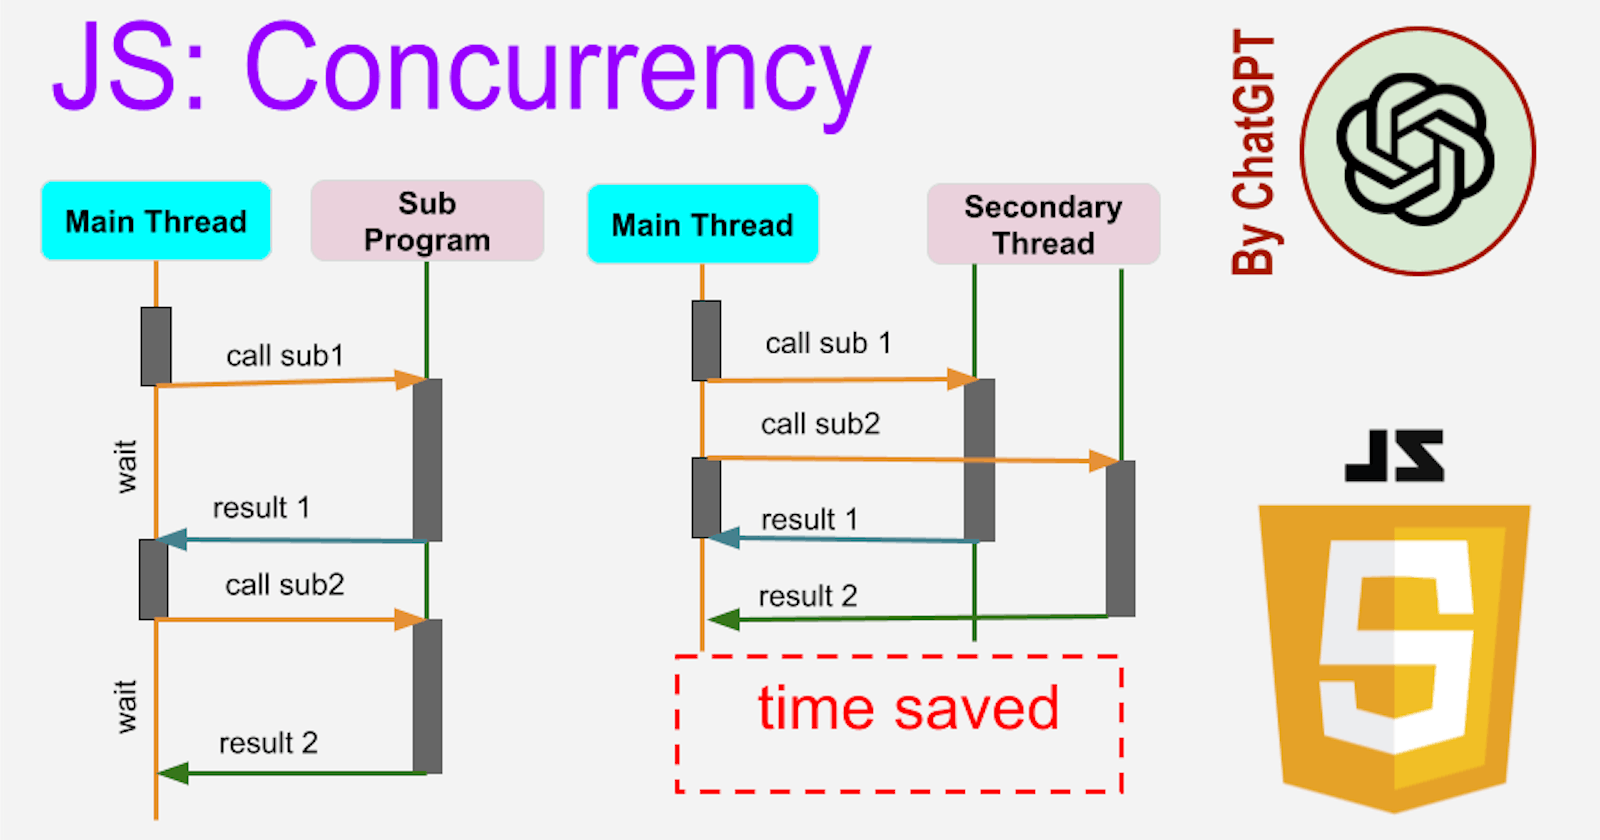 JS: Concurrency